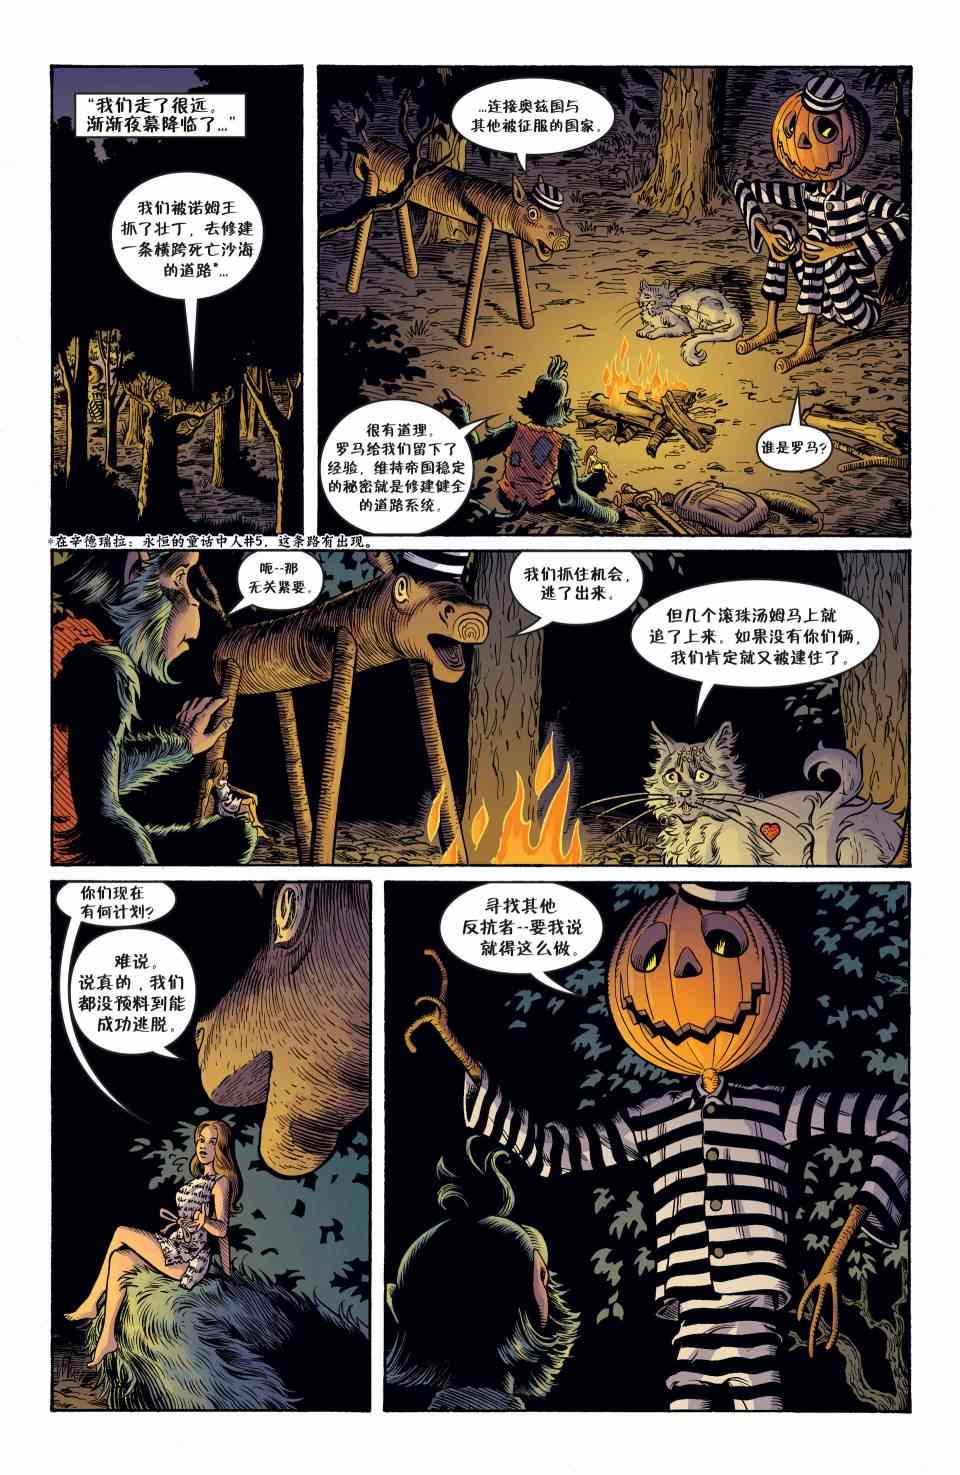 《Fables》漫画 101卷